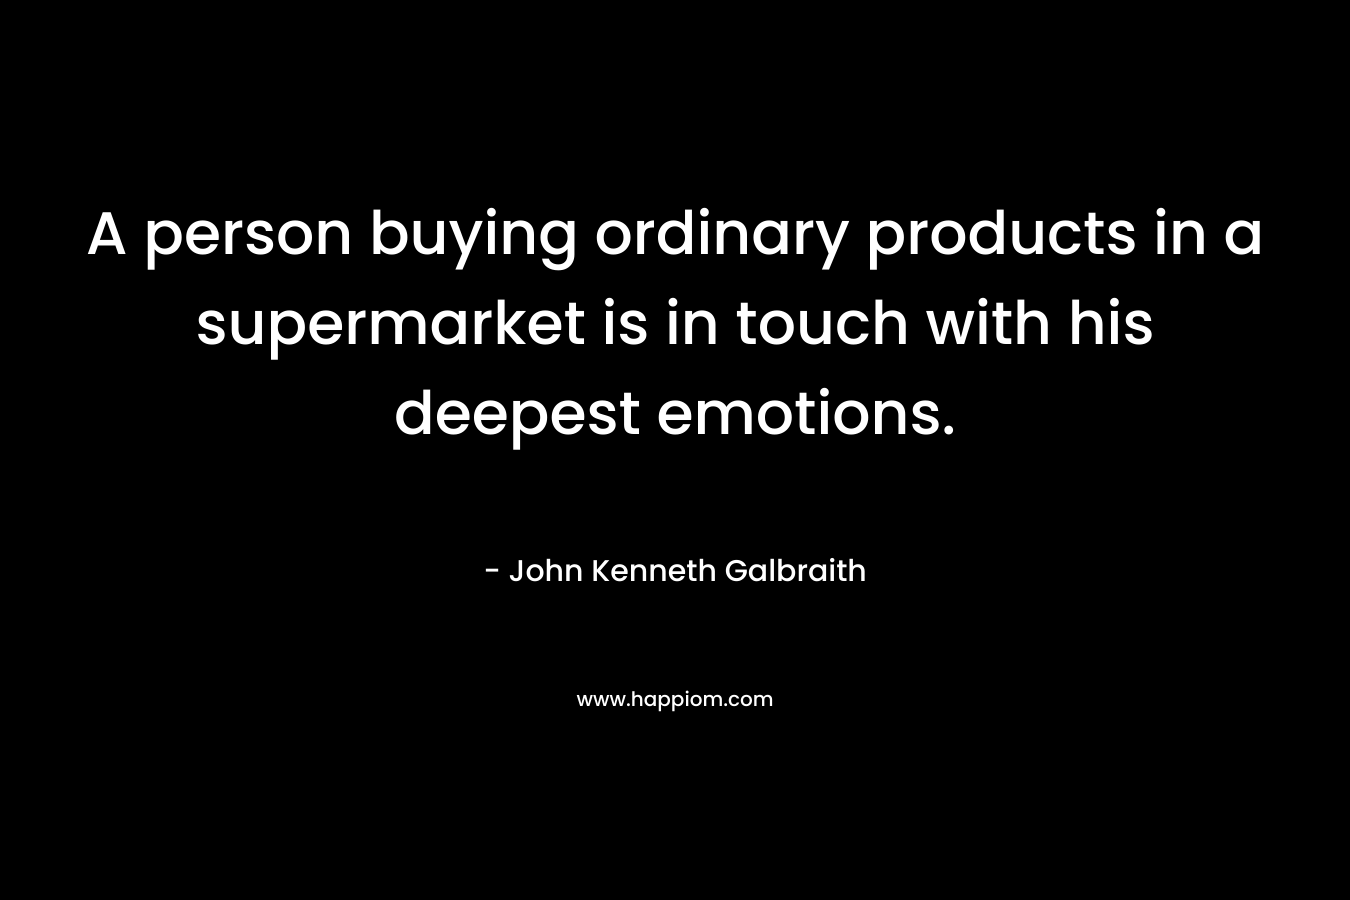 A person buying ordinary products in a supermarket is in touch with his deepest emotions. – John Kenneth Galbraith